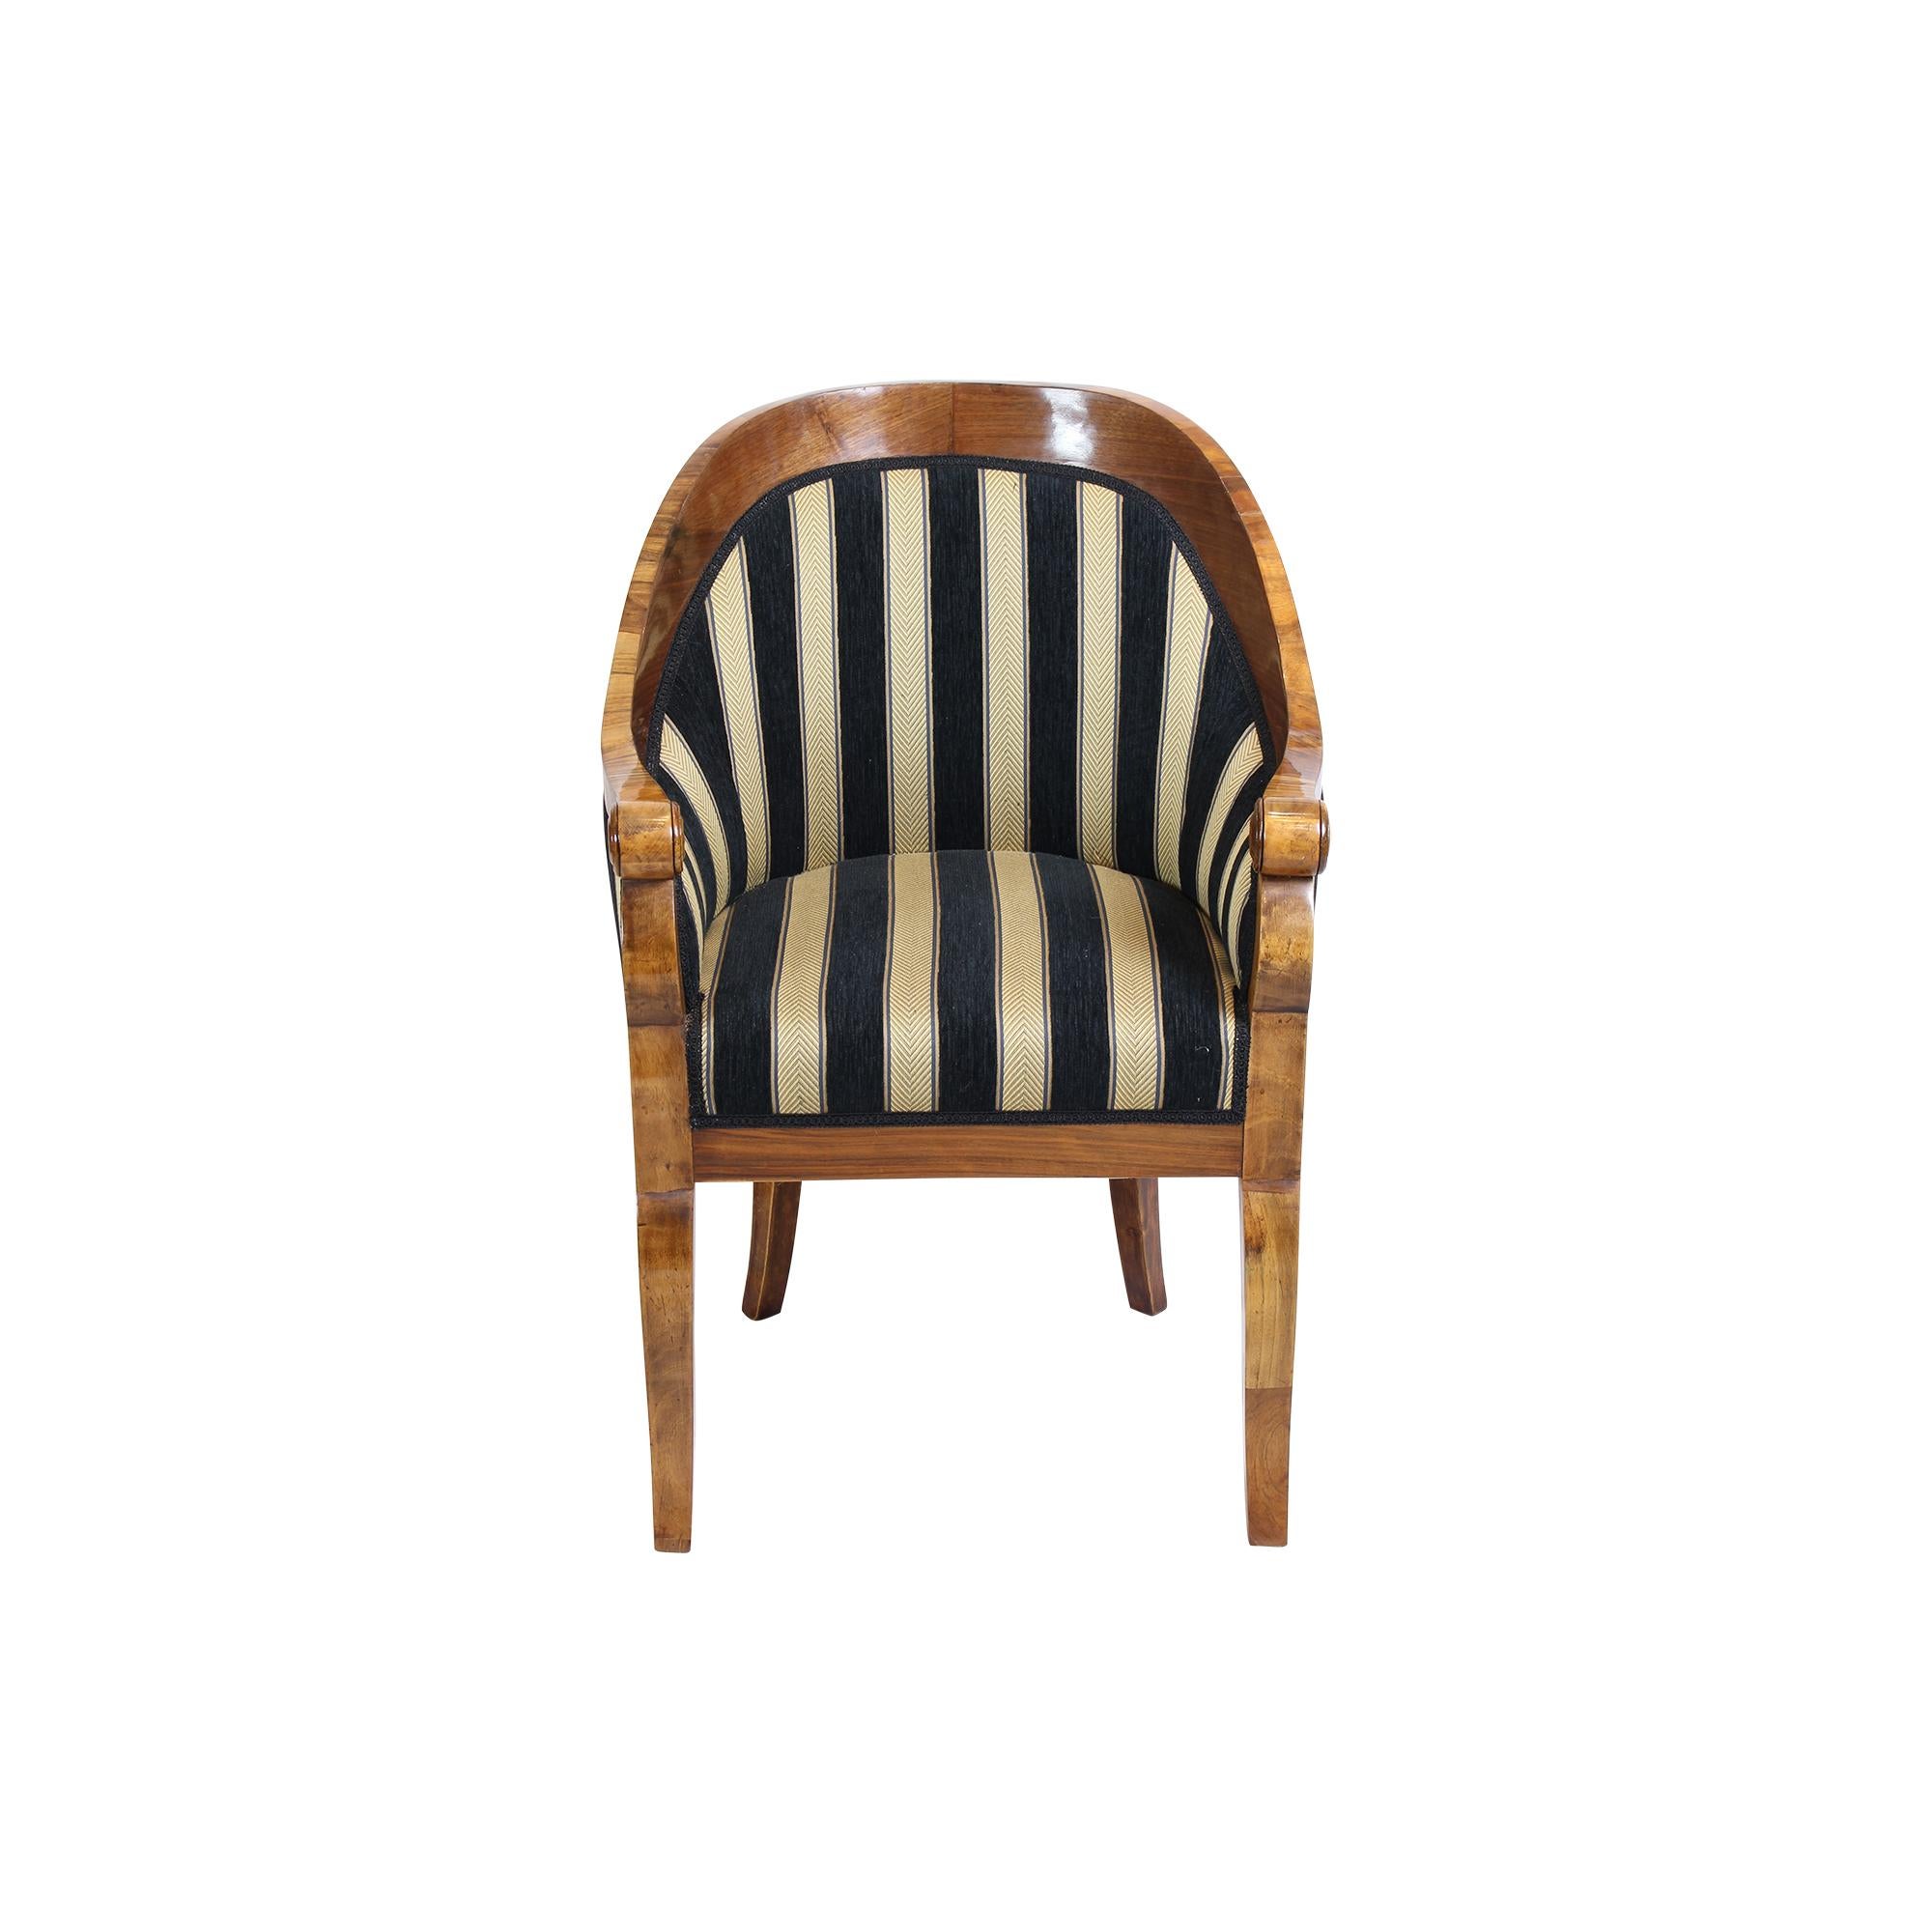 Elegant original Biedermeier Bergere chair from Vienna around 1825 in walnut veneer.
Very classicist design and great workmanship, the chair is newly upholstered and covered with new fabric. Beautiful small Beregeren seat. French polished with